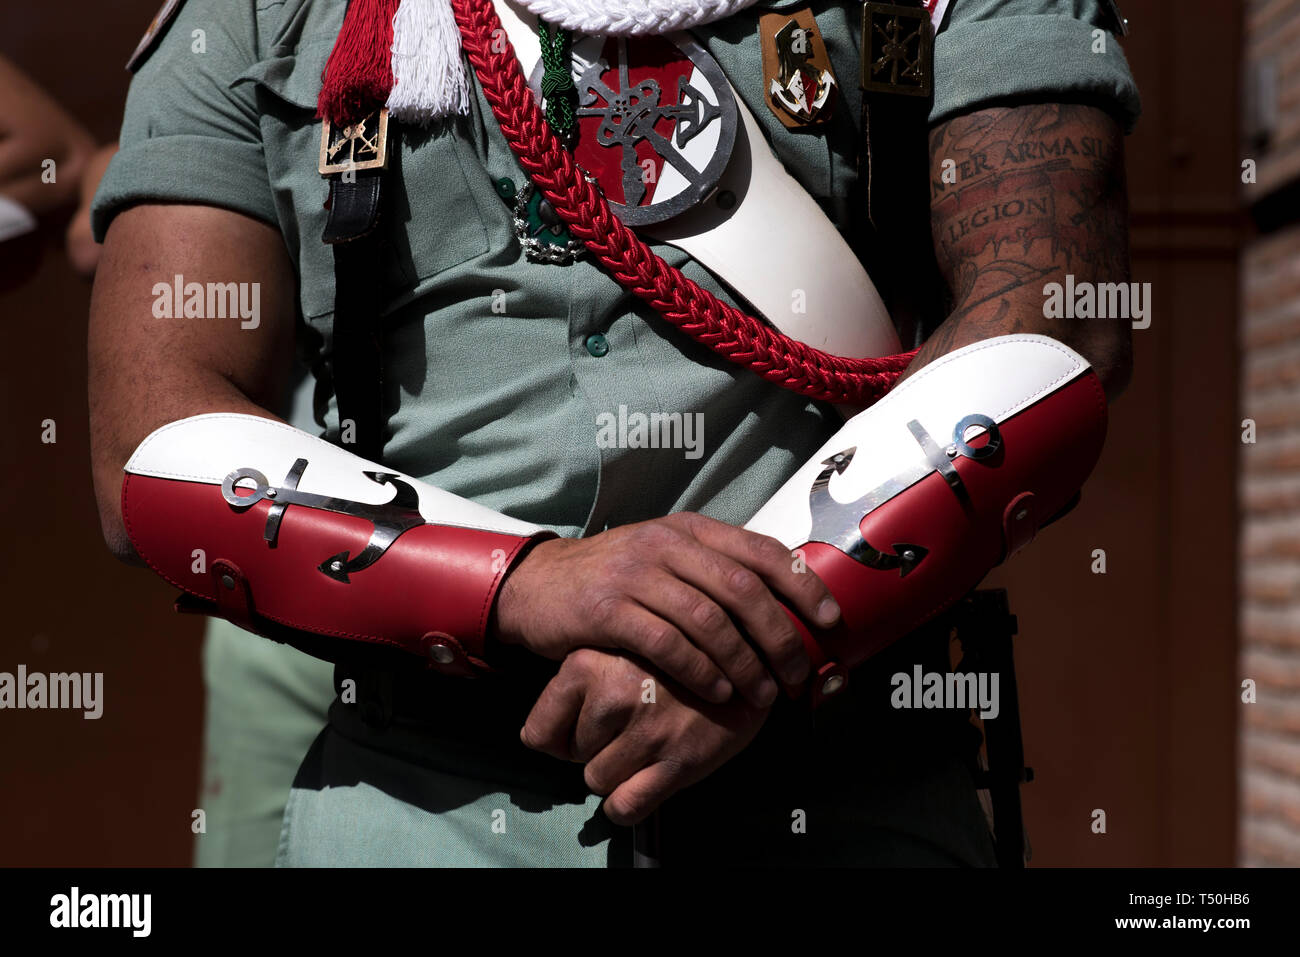 Soldier with a tattoo of the La Legion is seen during the Good Friday procession in Granada. Every year thousands of christians believers celebrates the Holy Week of Easter with the crucifixion and resurrection of Jesus Christ. Stock Photo